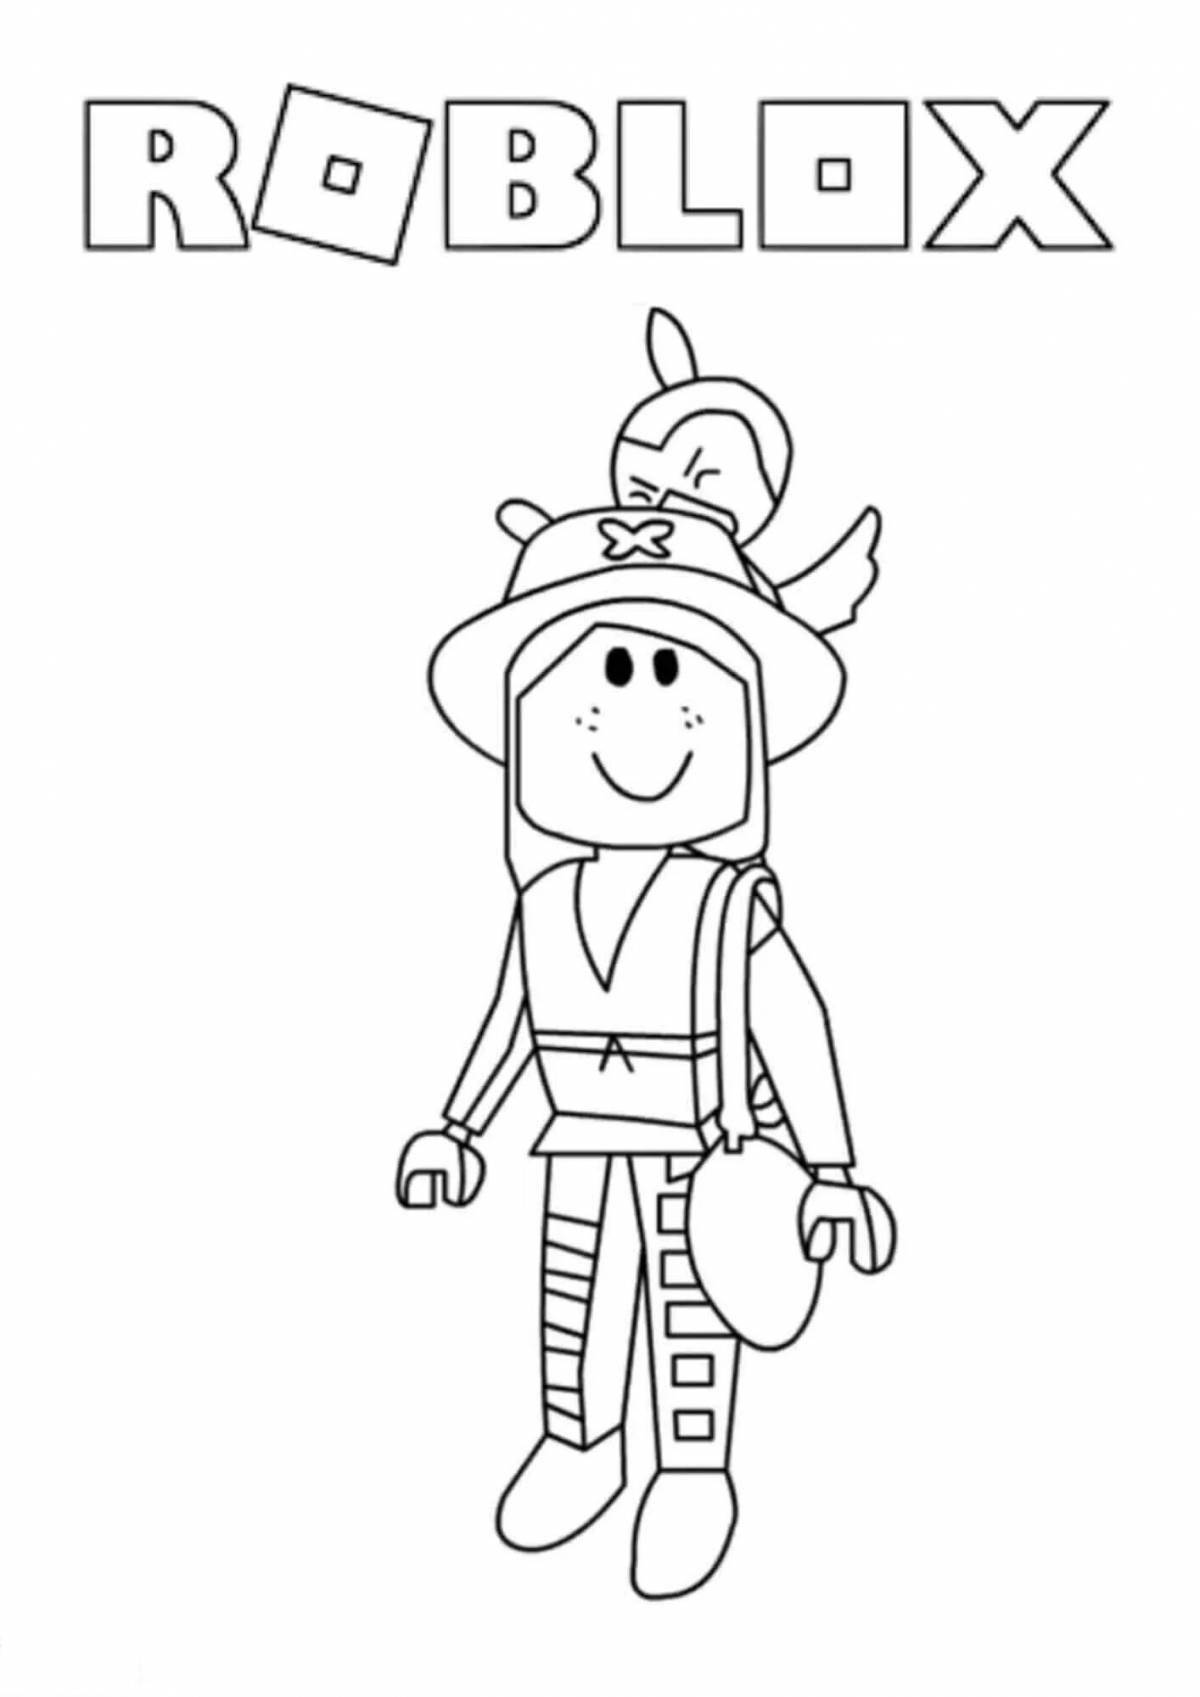 Roblox charming queen coloring page